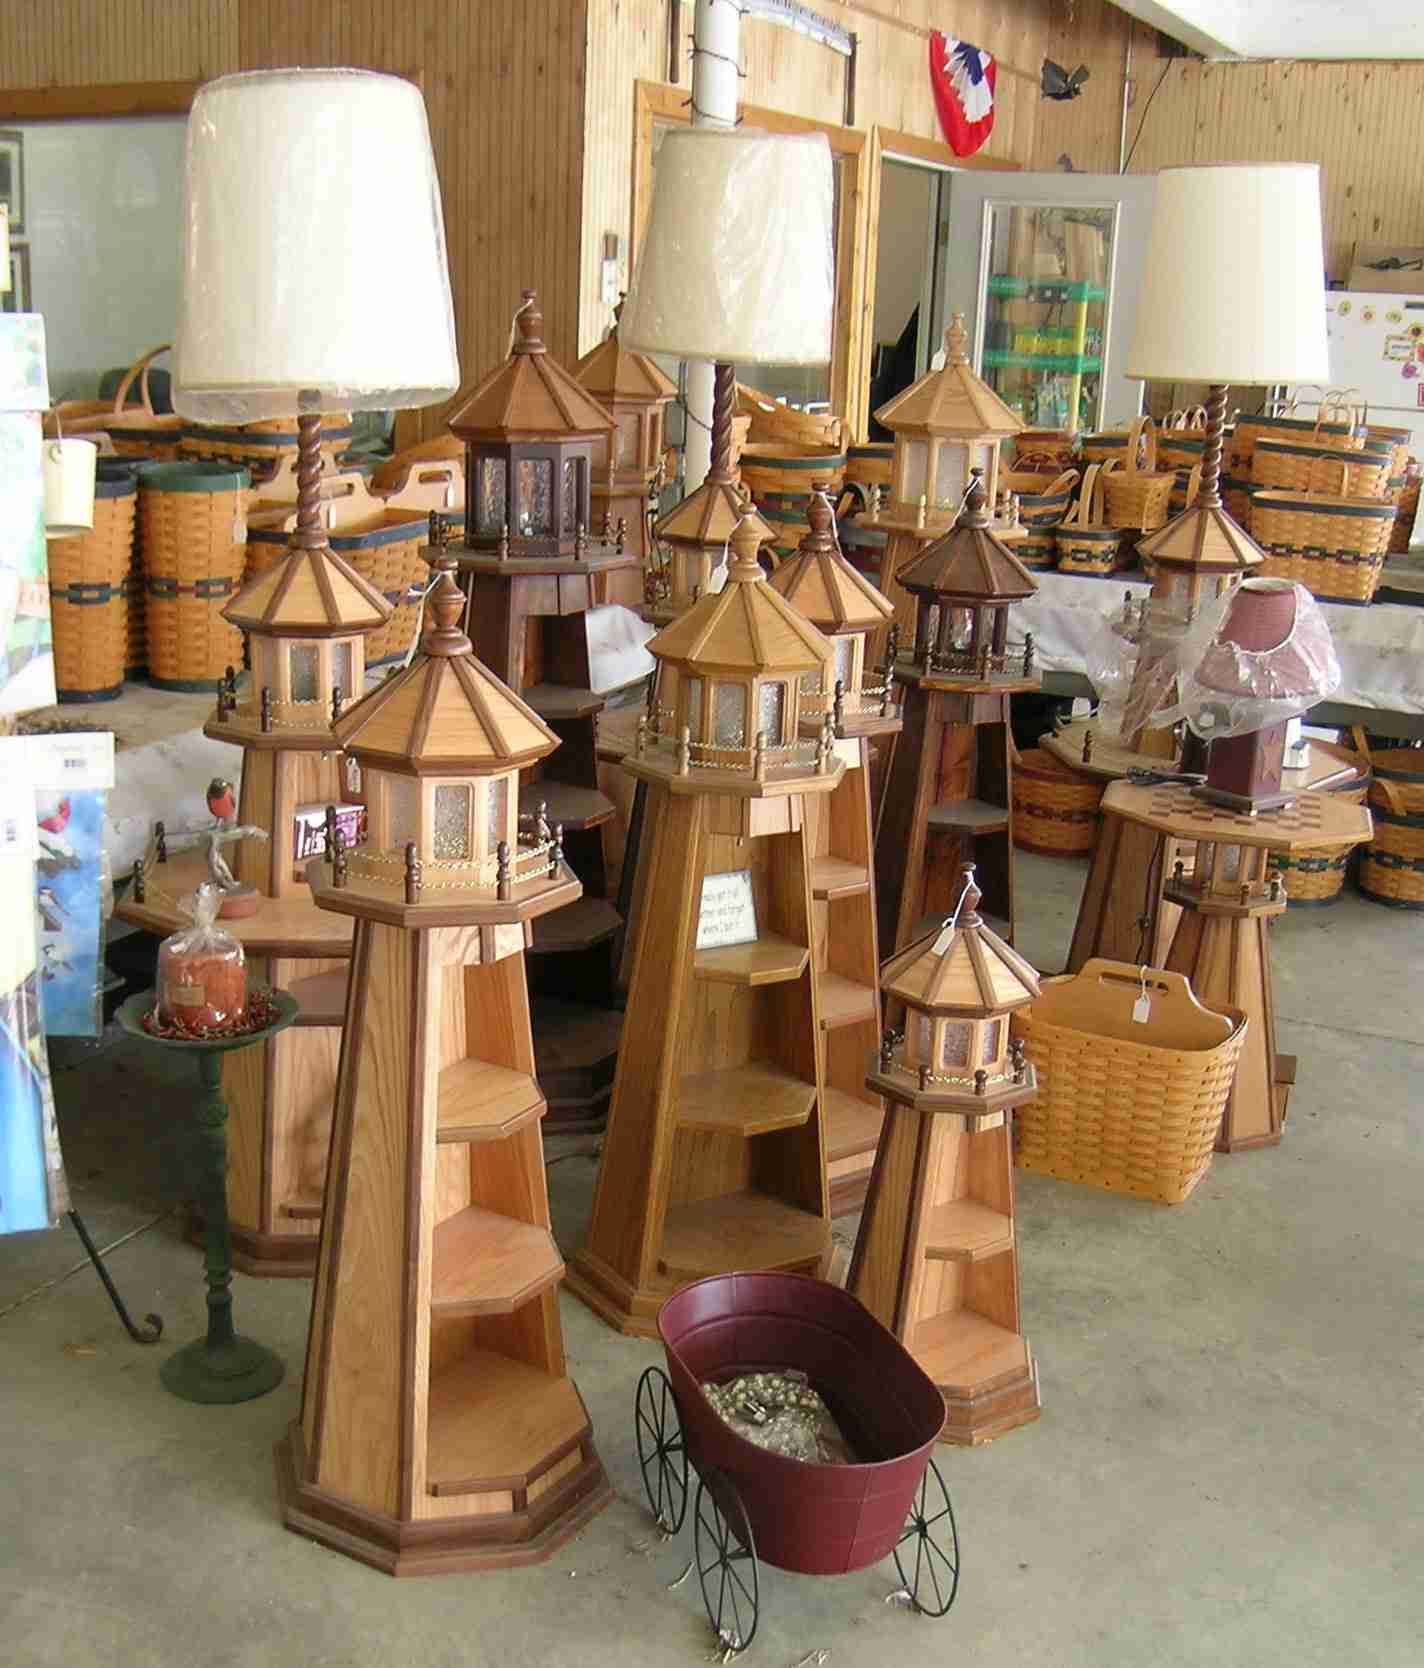 Variety of lighthouse furniture including lamps, chess table, and shelf units.